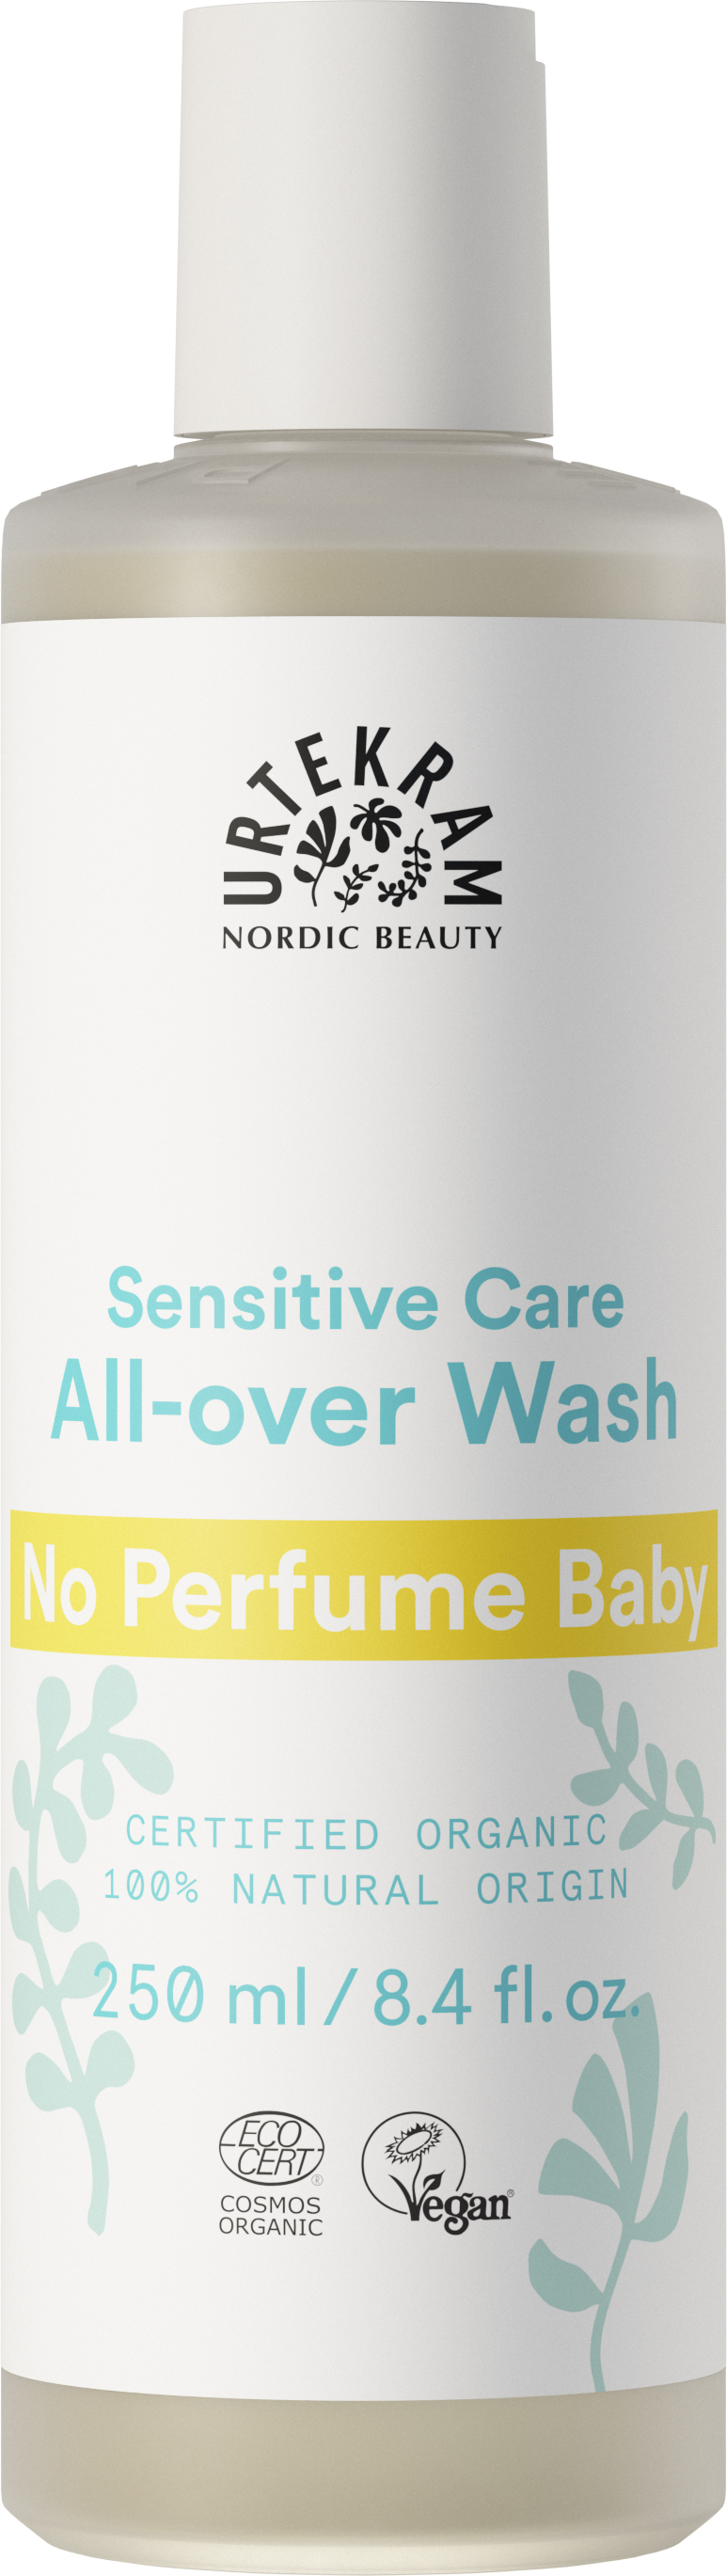 Caroline Relaterede deres No Perfume Baby All-over Wash